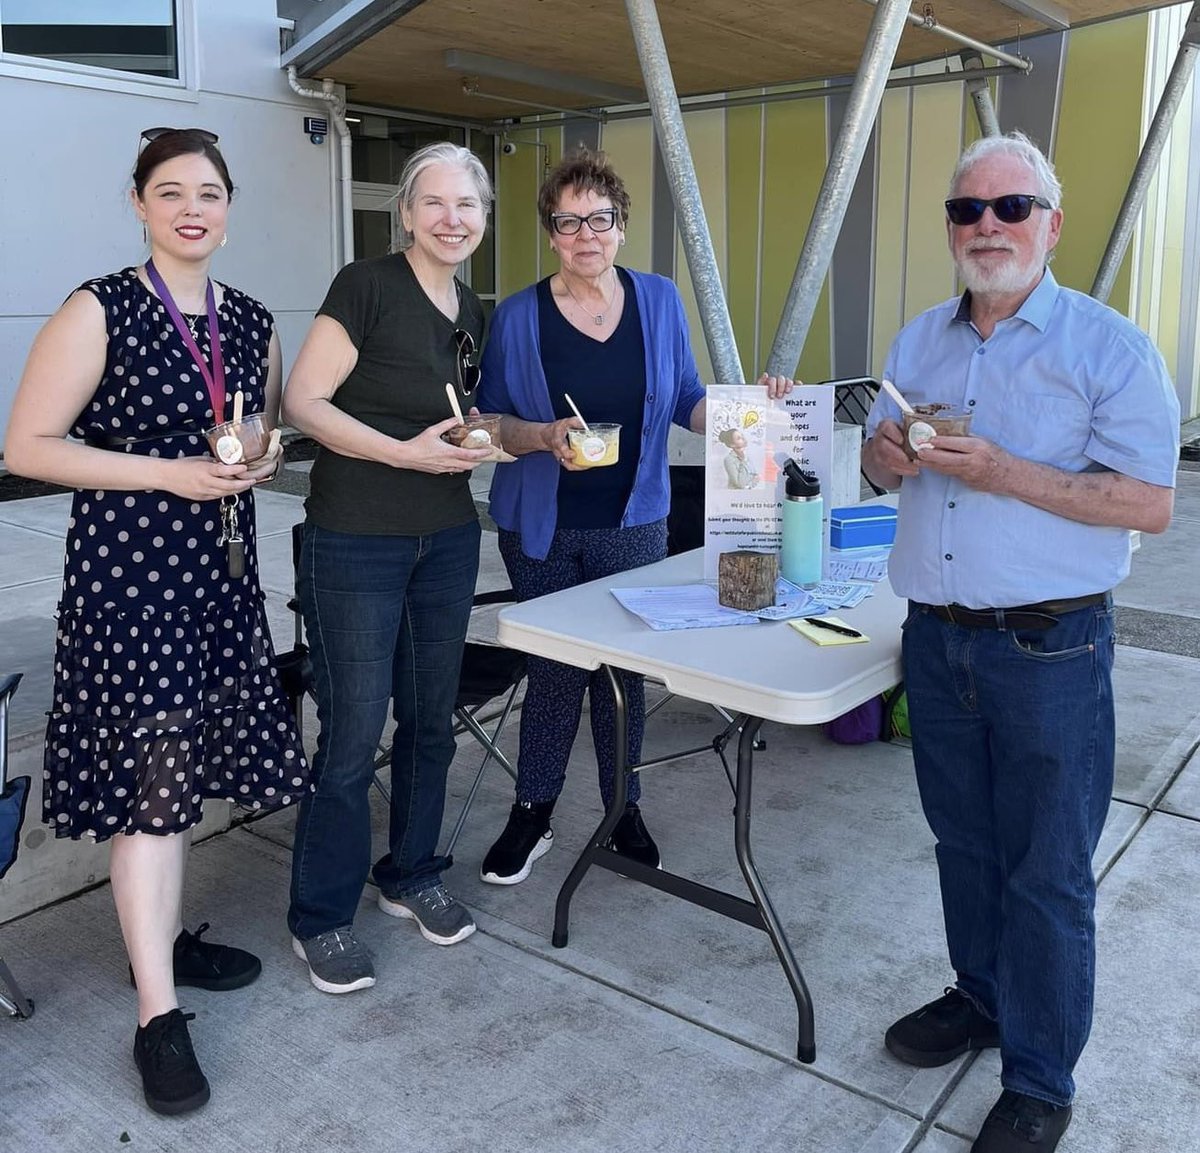 Thank you, Chilliwack Teachers’ Association, for inviting us to talk with early career teachers about their Hopes and Dreams for public education in BC. We really appreciated being there. (Loved the smoothie bowl treats, too!) #bced #PublicEdPublicGood